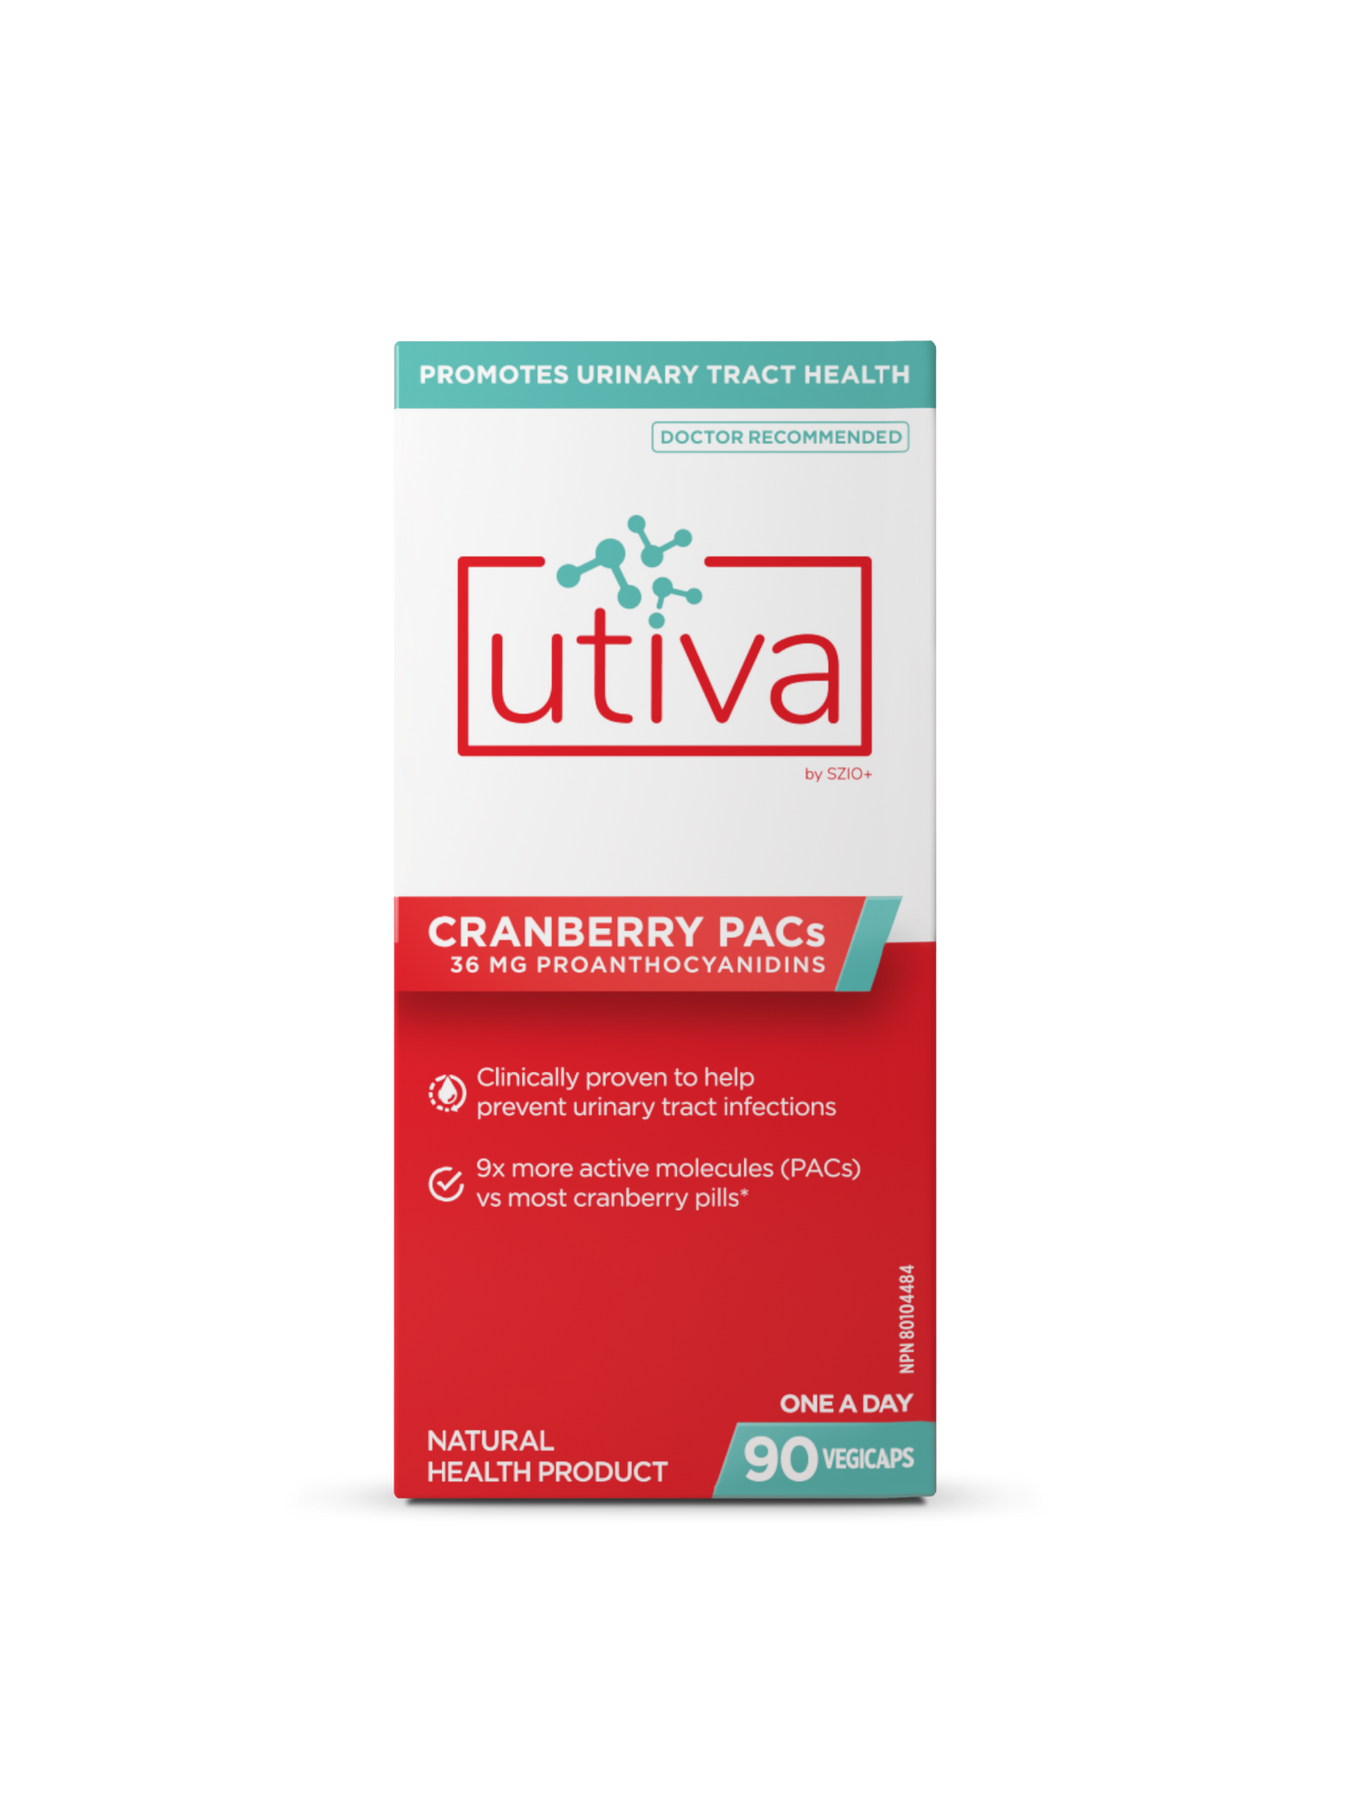 Utiva - Urinary Tract Infection Prevention - ActivKare